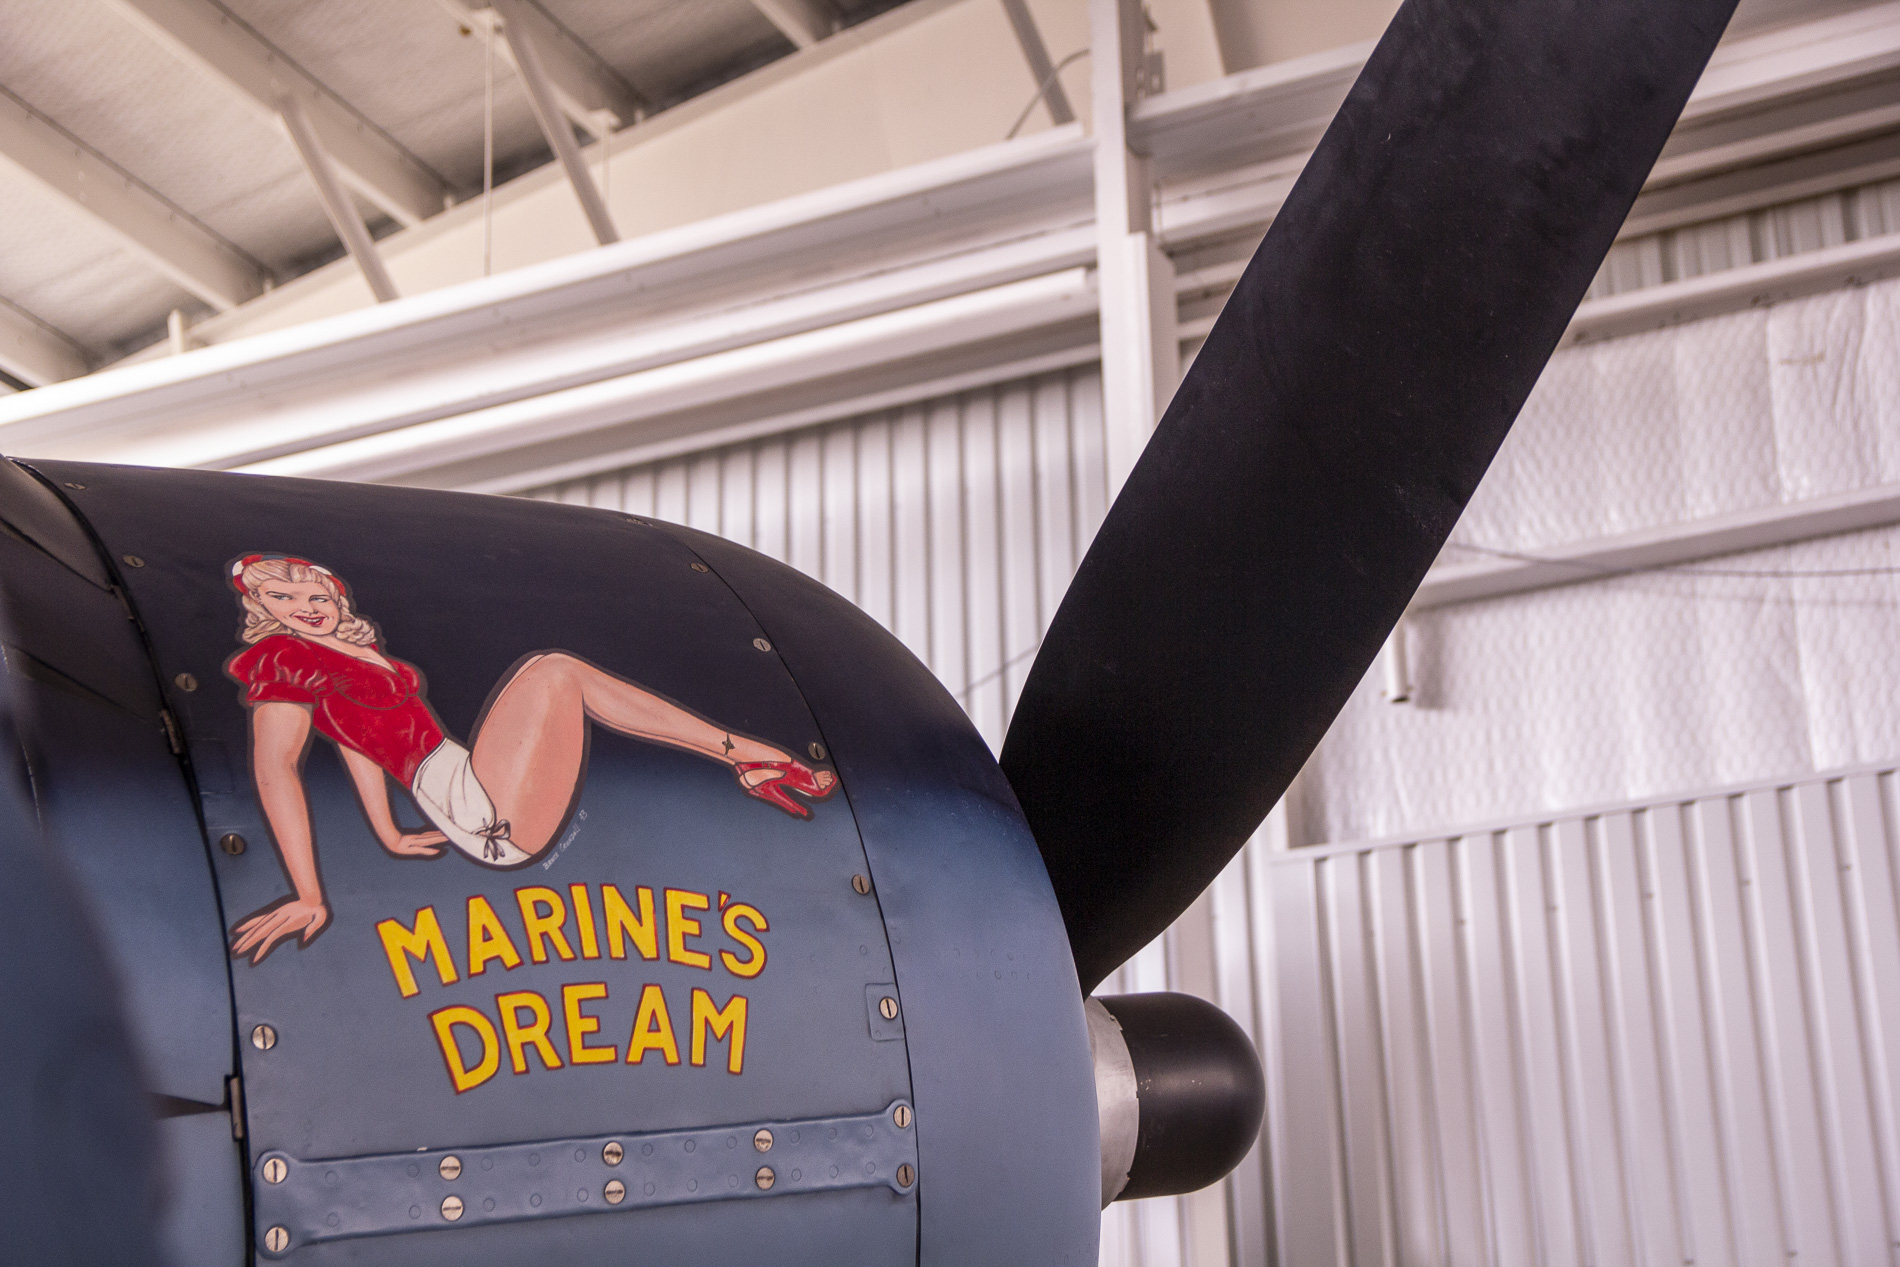 Vintage Aircraft and Vehicles at Mid-America Flight Museum